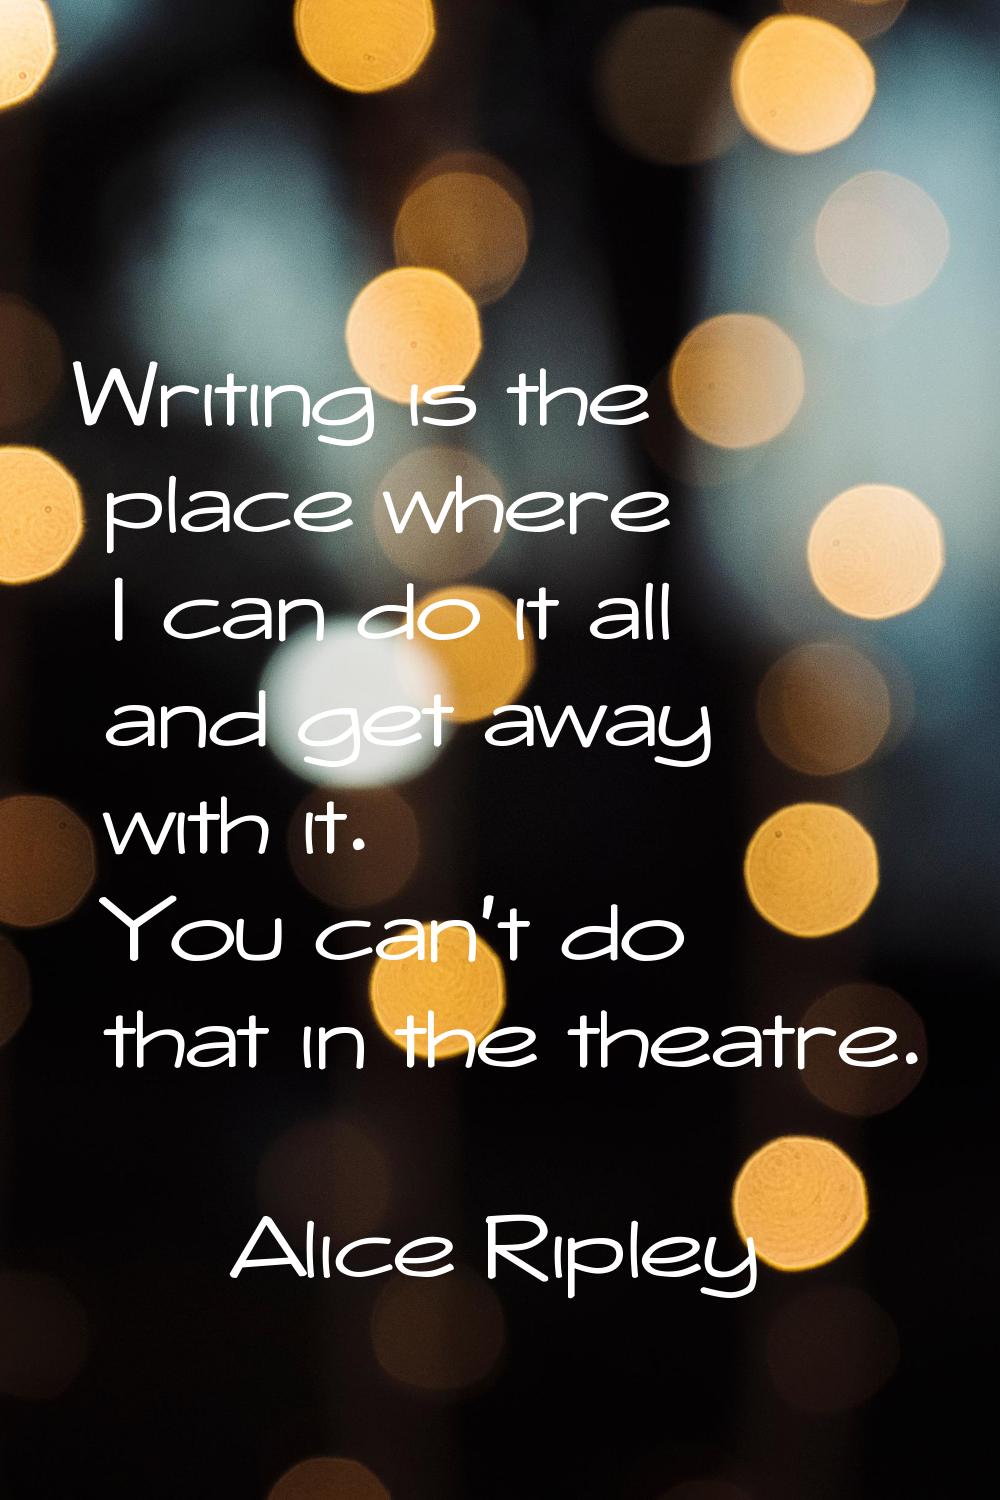 Writing is the place where I can do it all and get away with it. You can't do that in the theatre.